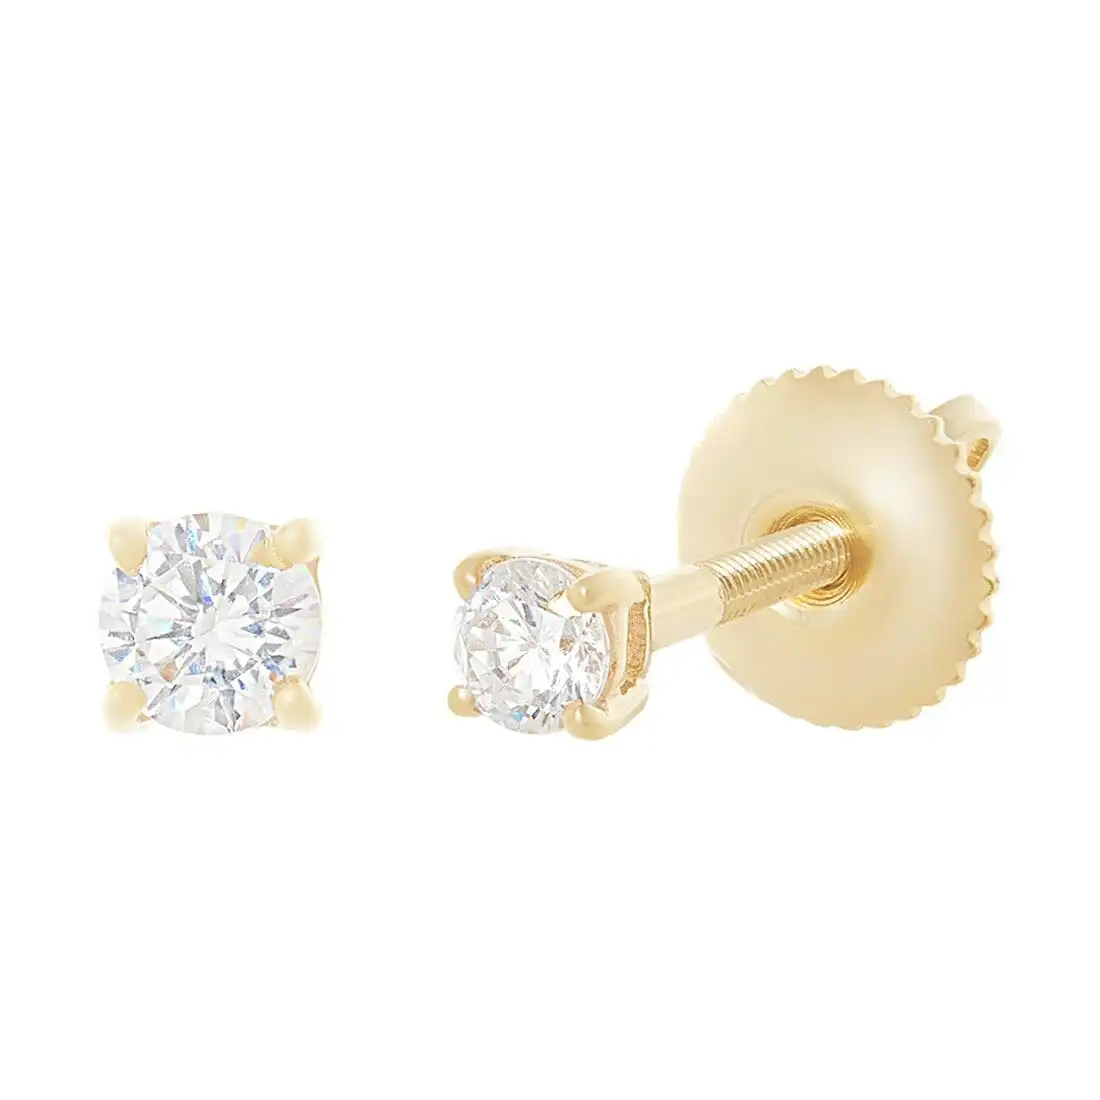 9ct Yellow Gold 3mm Stud Earring with Cubic Zirconia